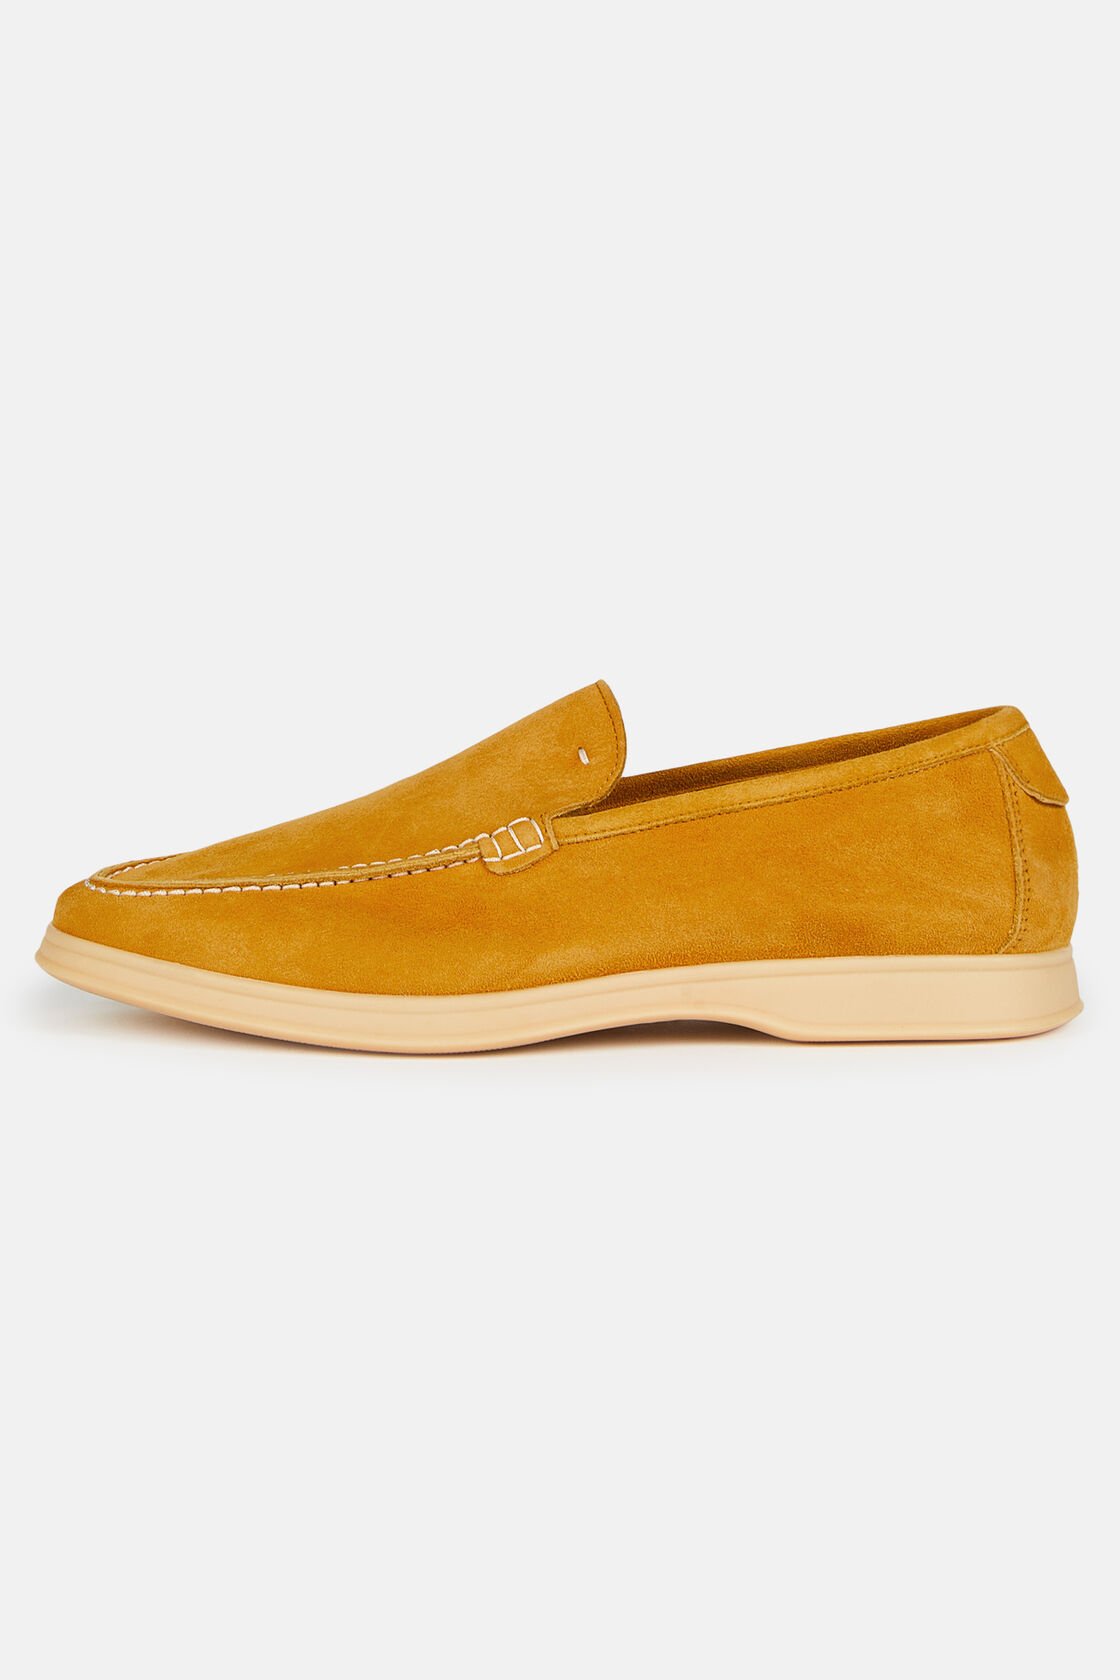 Suède loafers, Yellow, hi-res